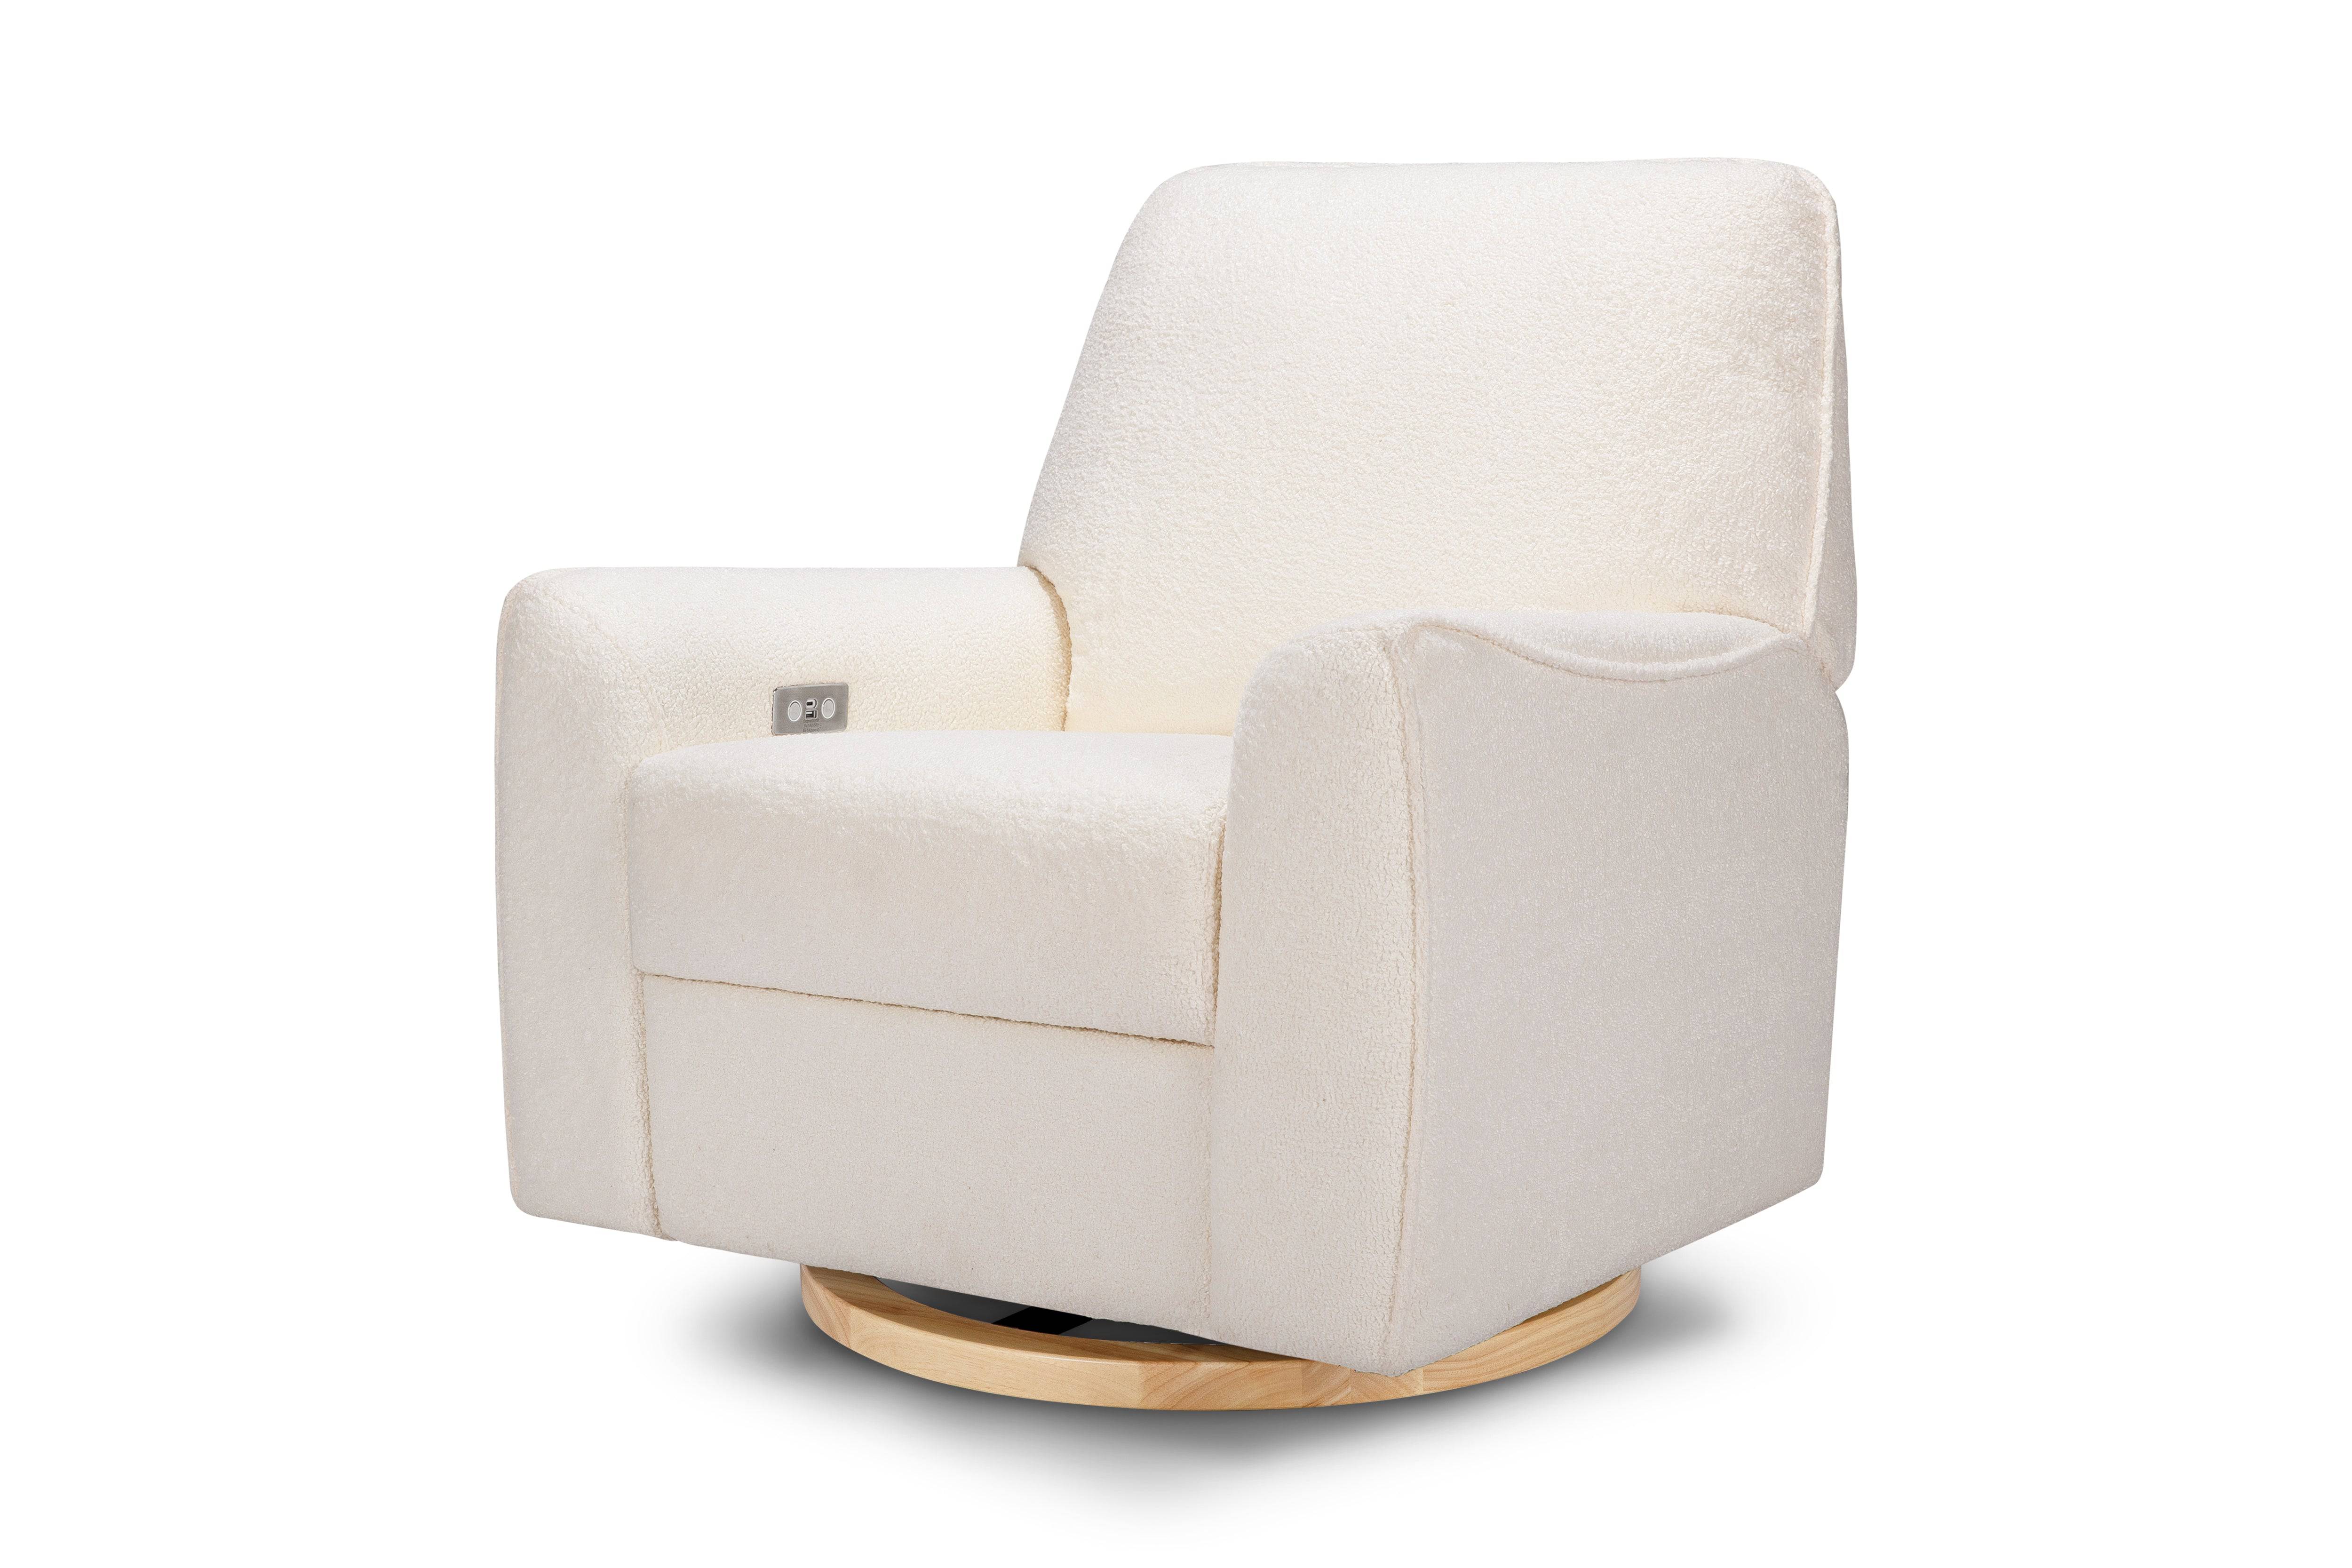 Sunday Power Recliner and Swivel Glider in Chantilly Sherpa with Light Wood Base - Twinkle Twinkle Little One